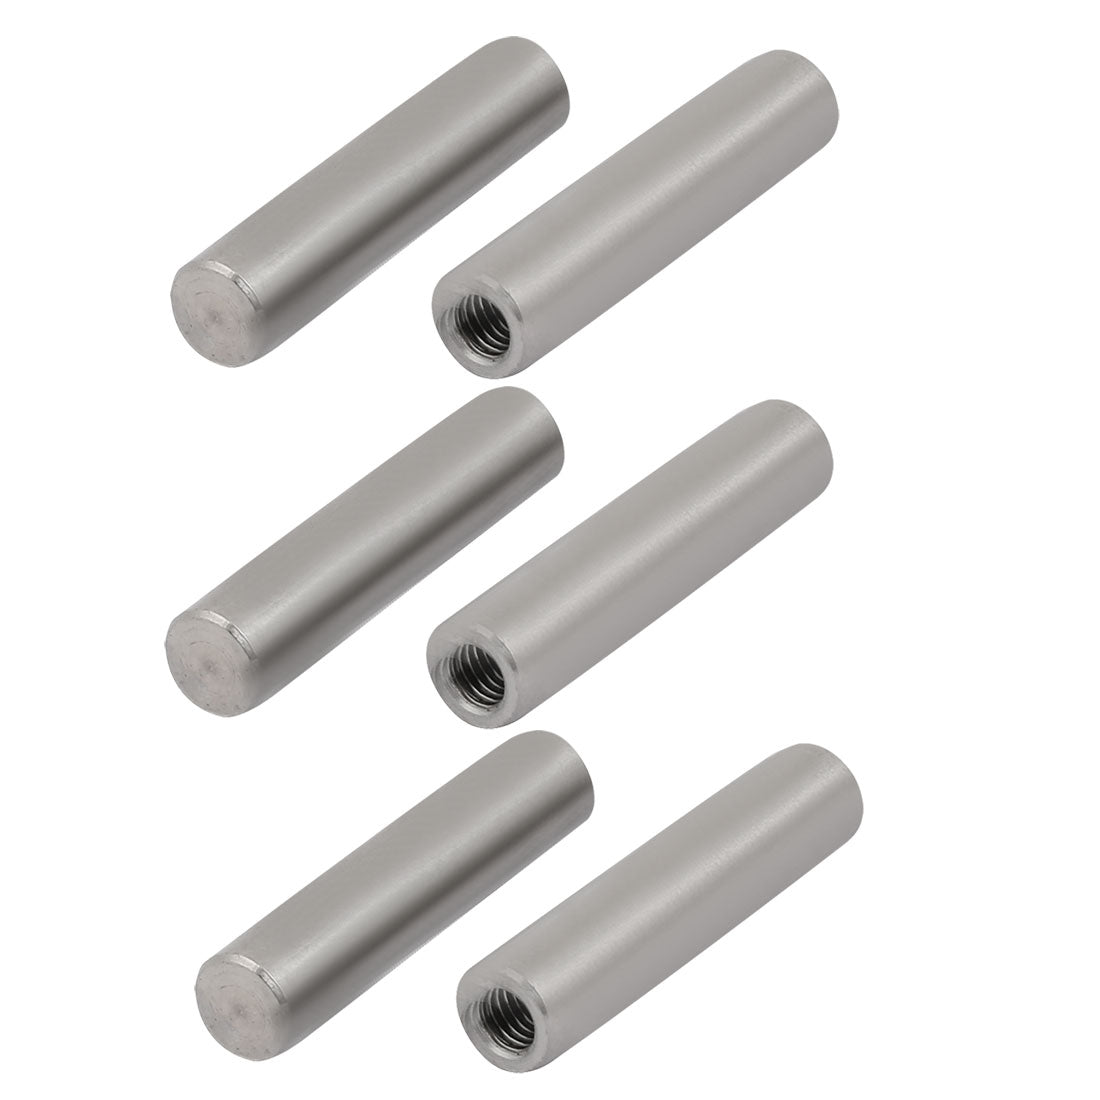 uxcell Uxcell 304 Stainless Steel M6 Female Thread 10mm x 45mm Cylindrical Dowel Pin 6pcs